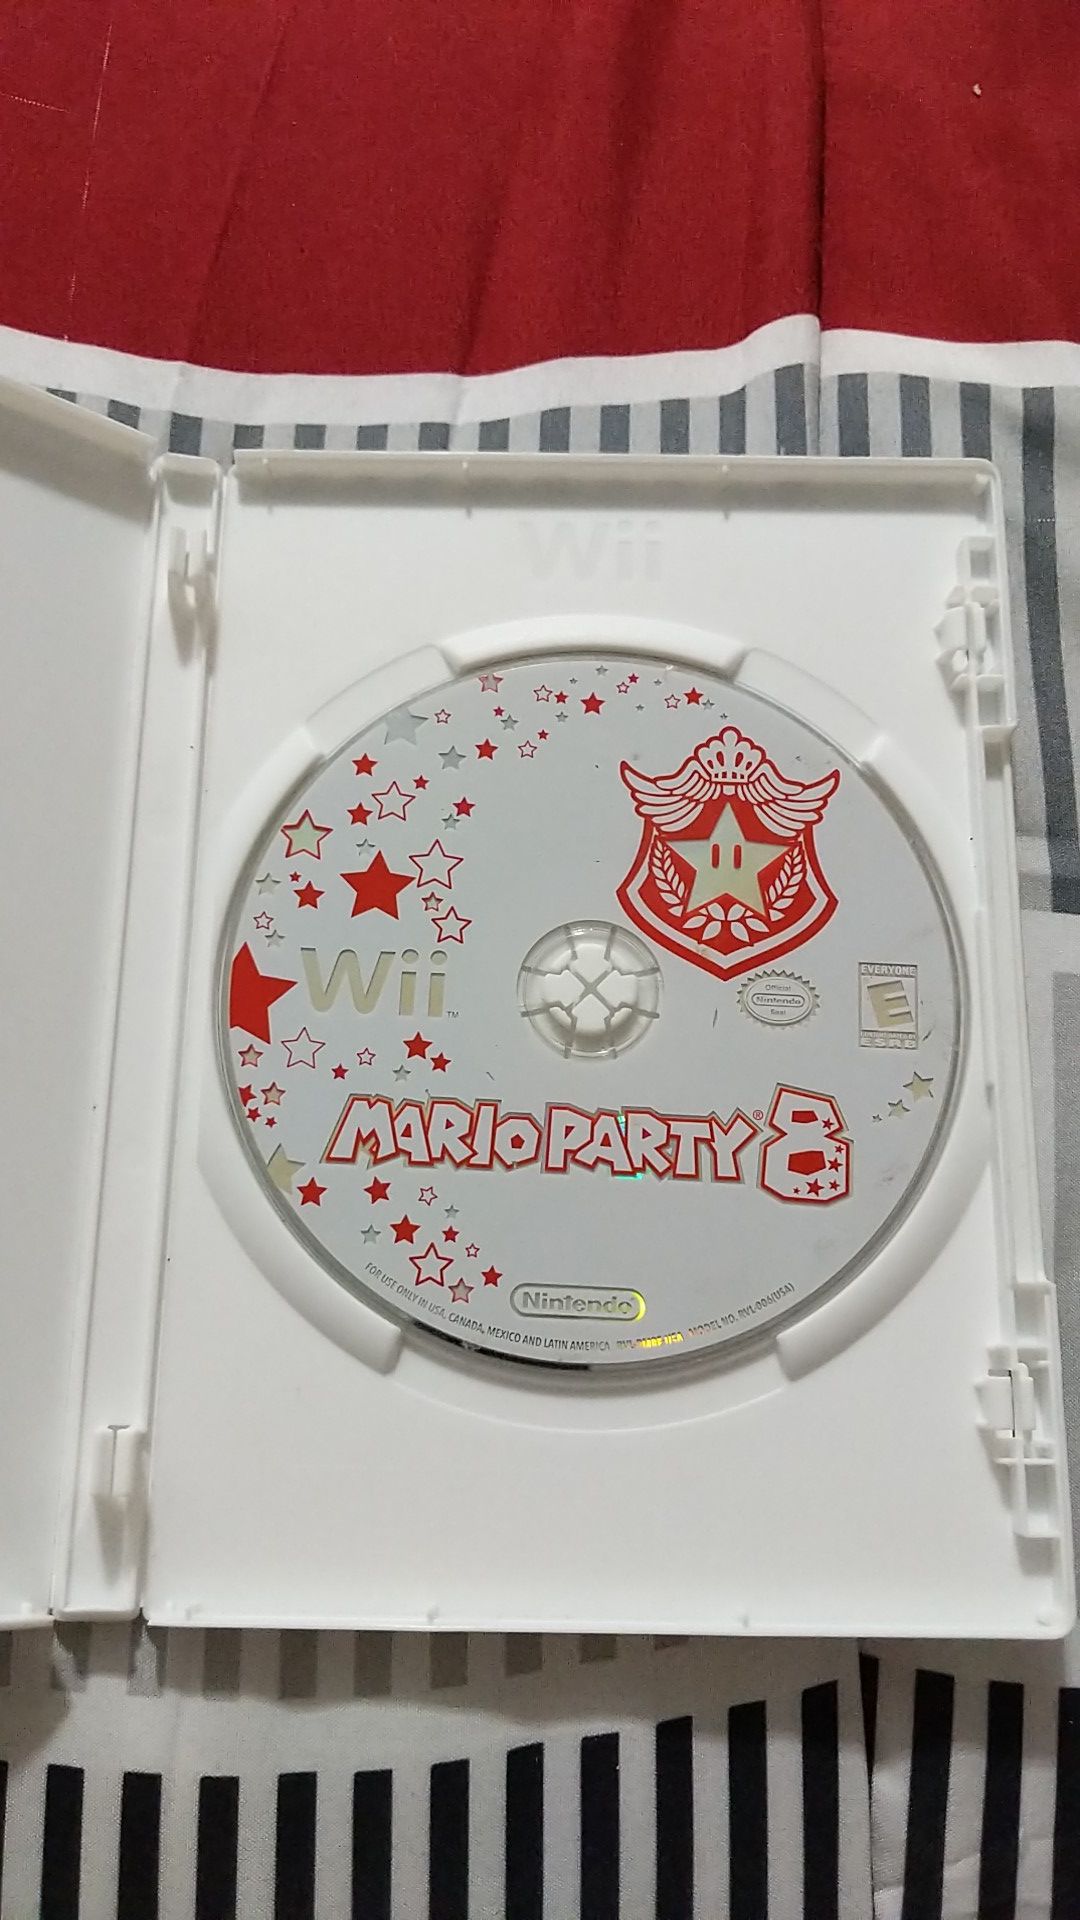 Mario Party 8 Wii Game